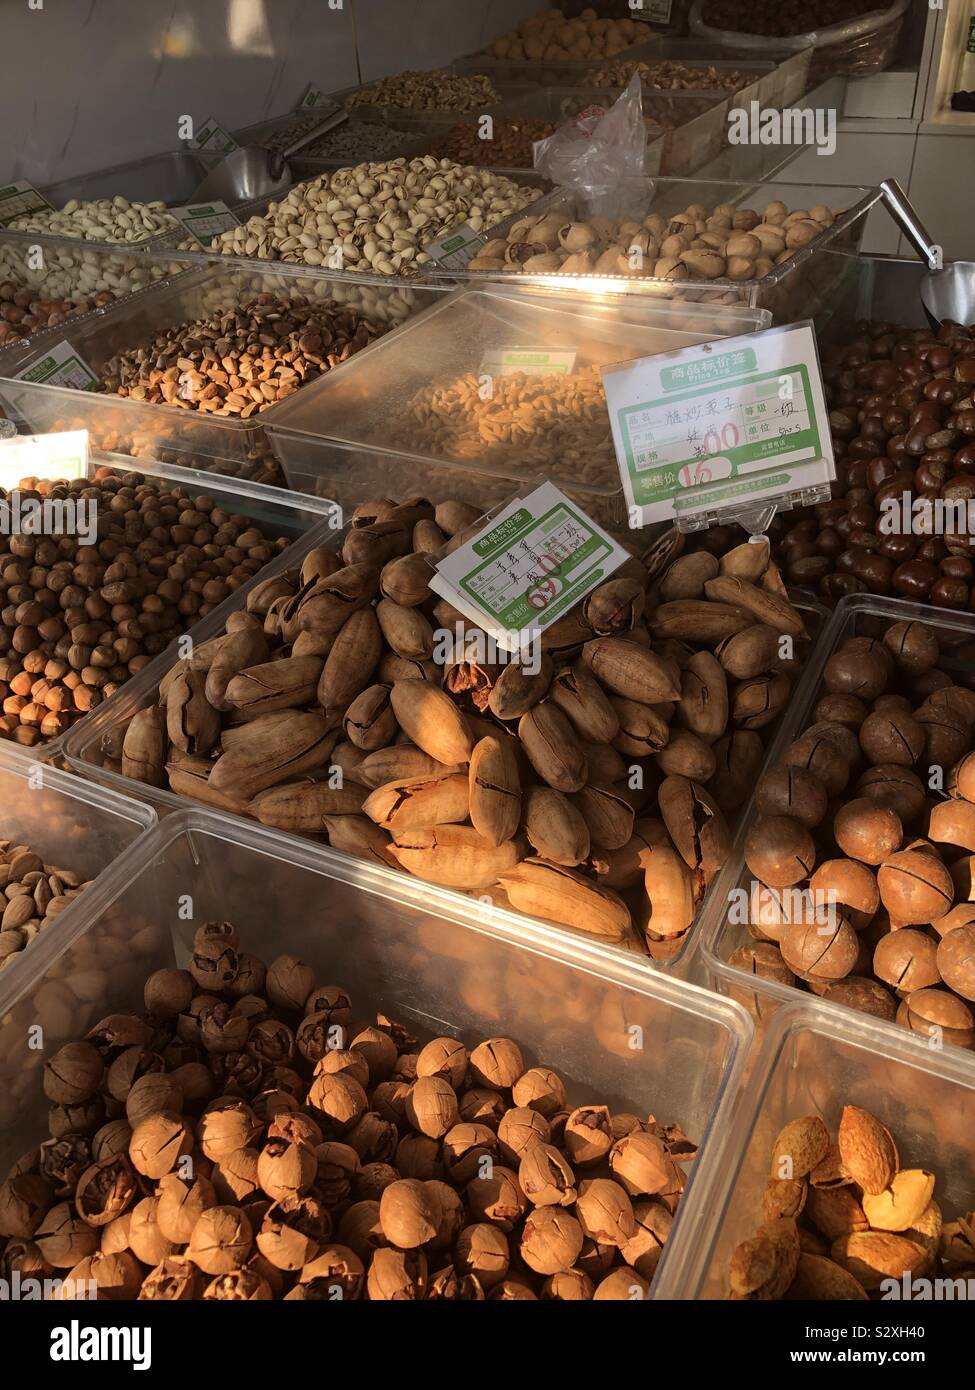 A selection of nuts for sale in late evening sunlight on a street stall in Beijing China. Stock Photo